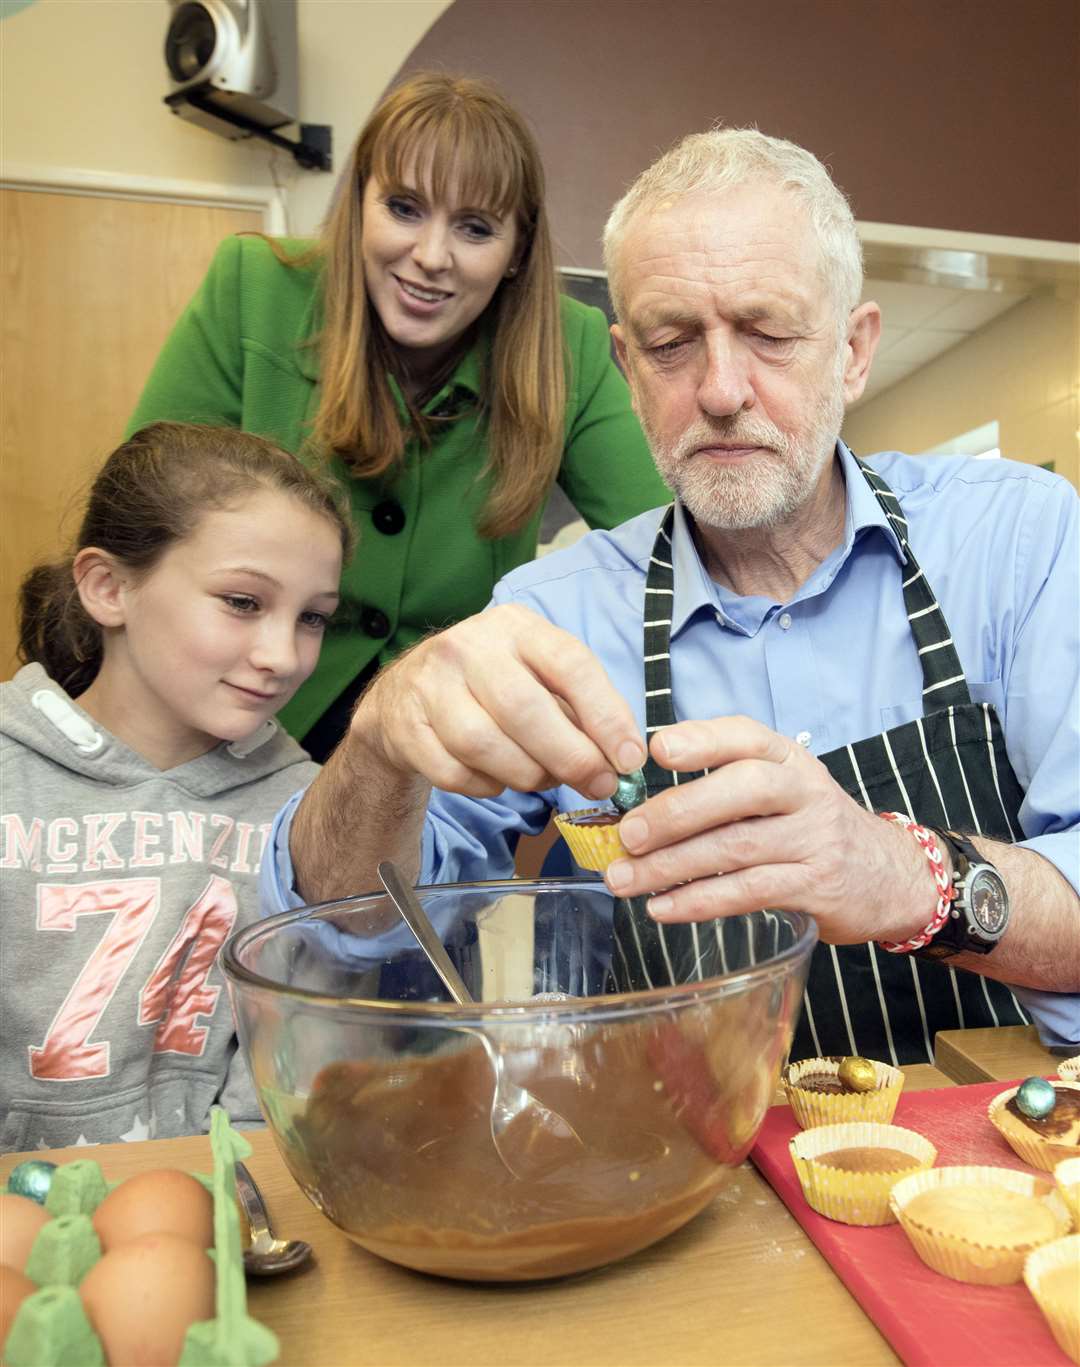 Angela Rayner during a visit with Jeremy Corbyn during his time as Labour leader (Danny Lawson/PA)